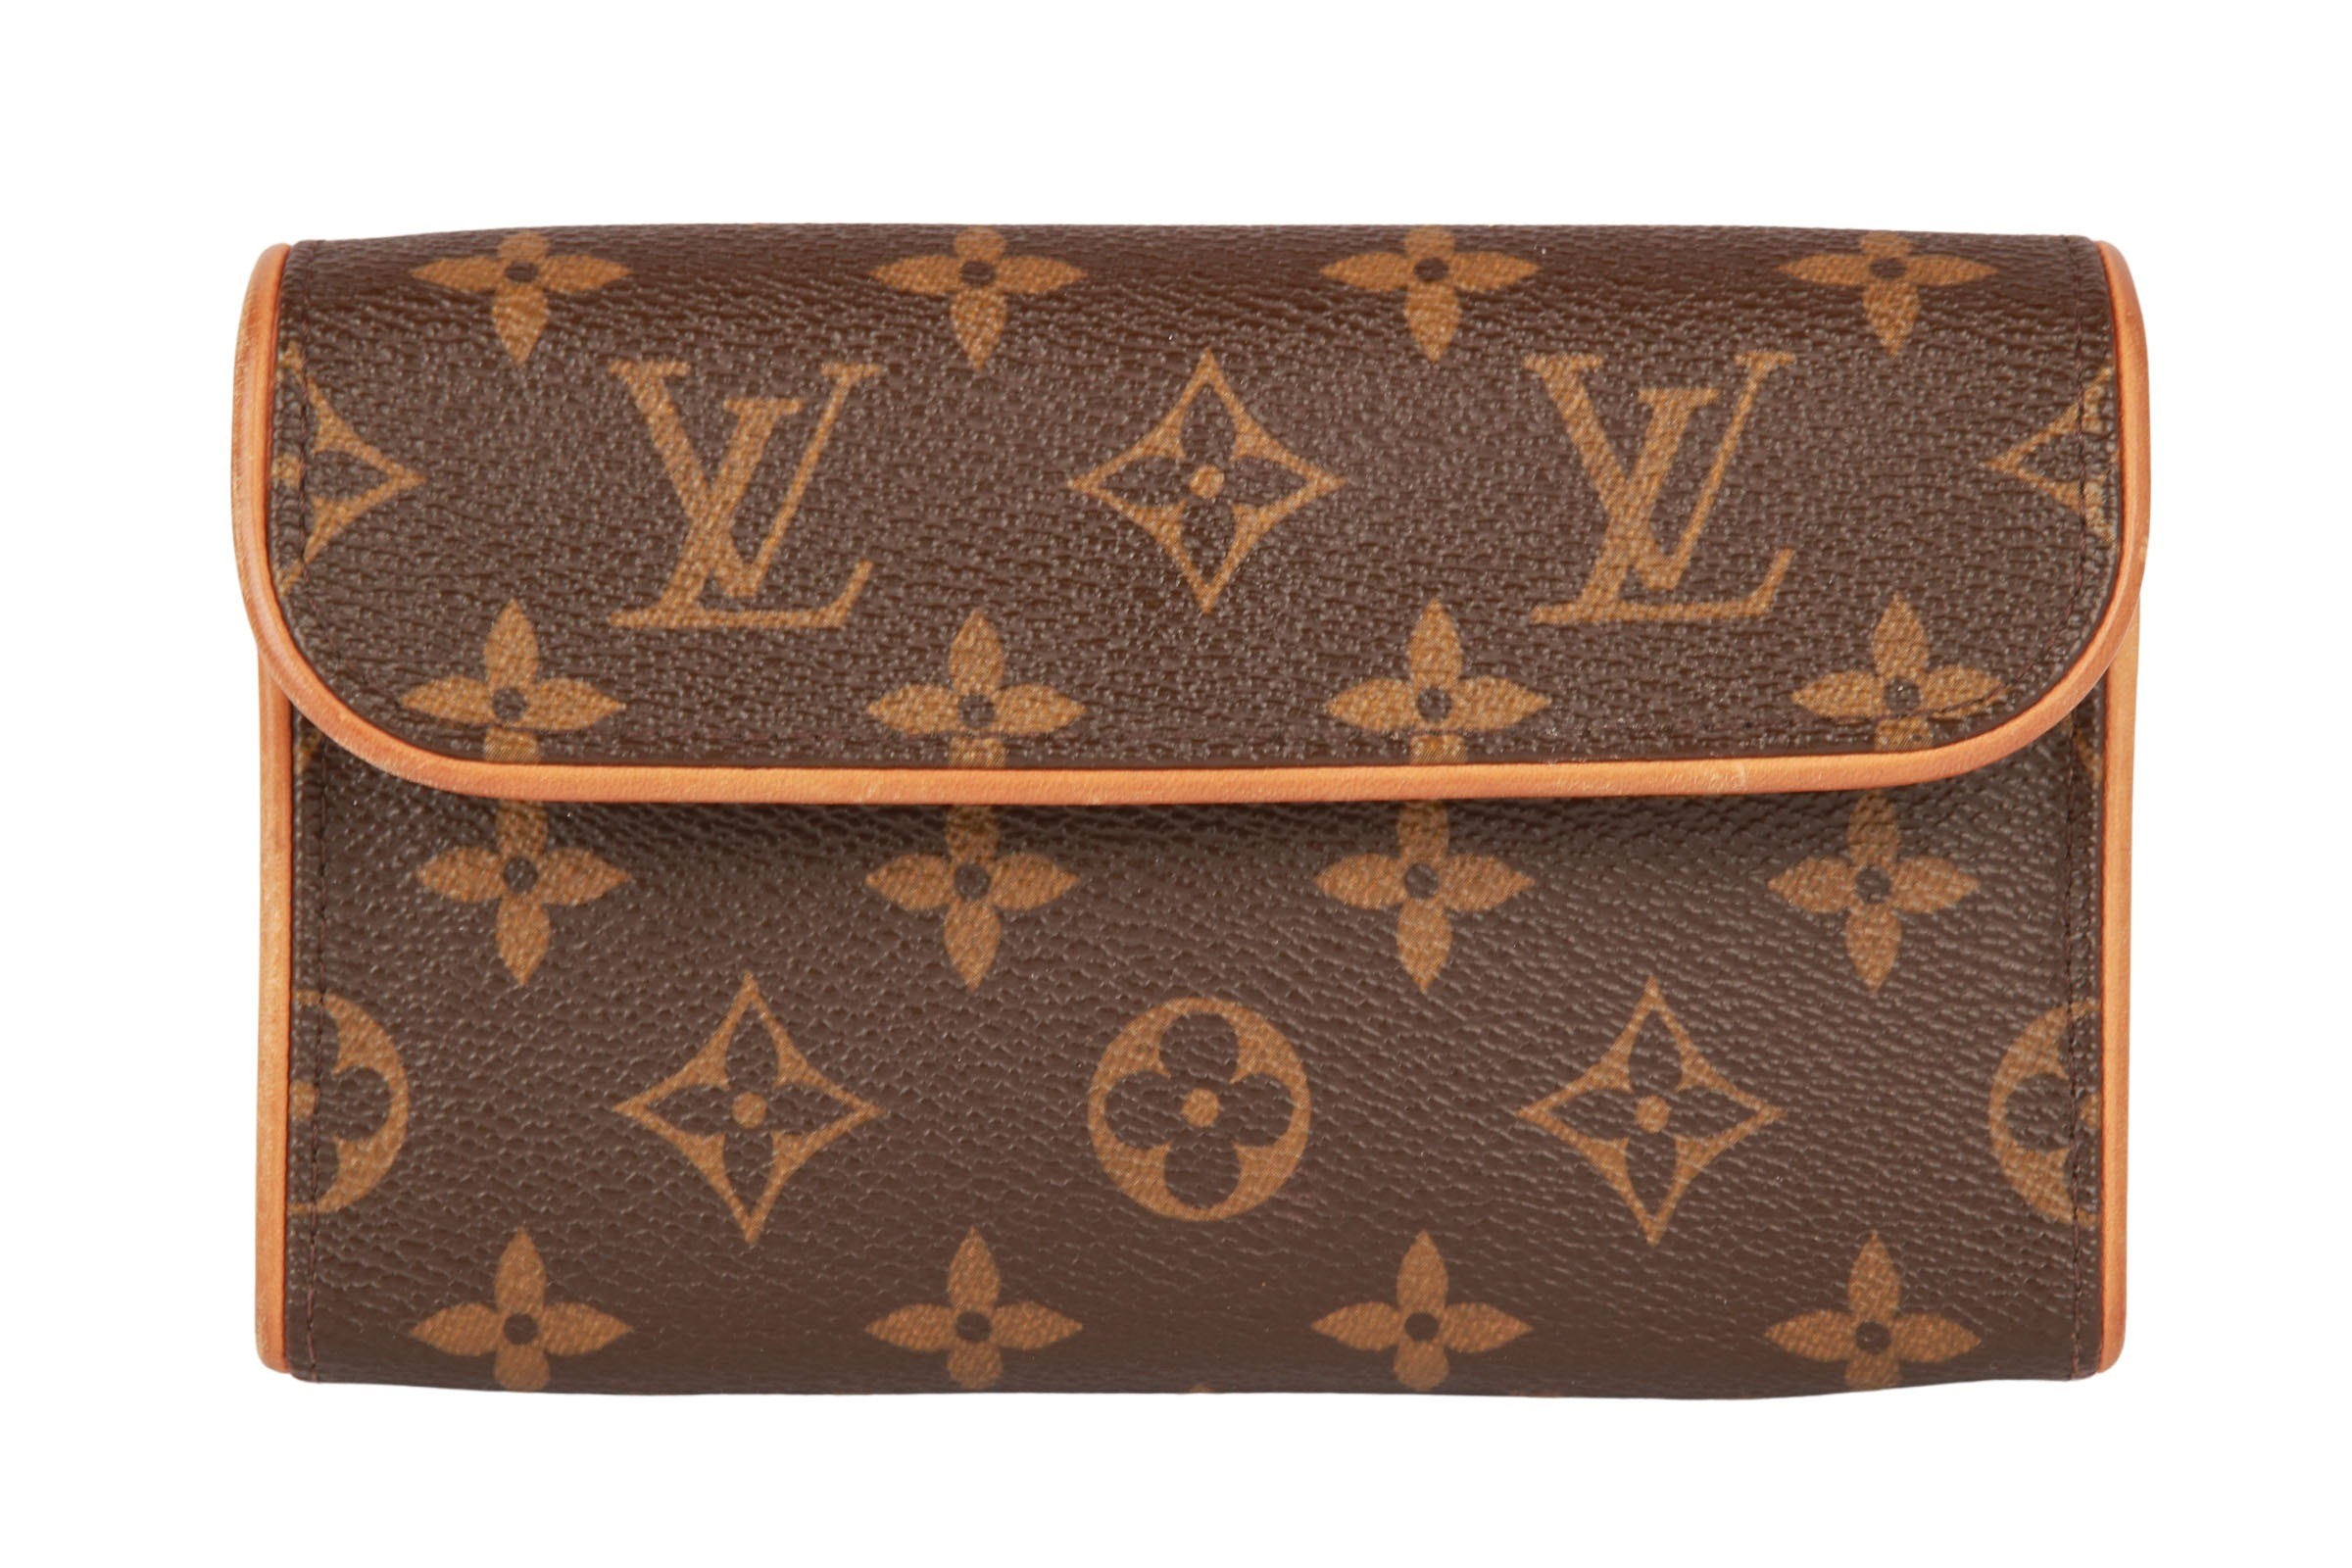 Mini Bumbag Monogram Canvas - Wallets and Small Leather Goods